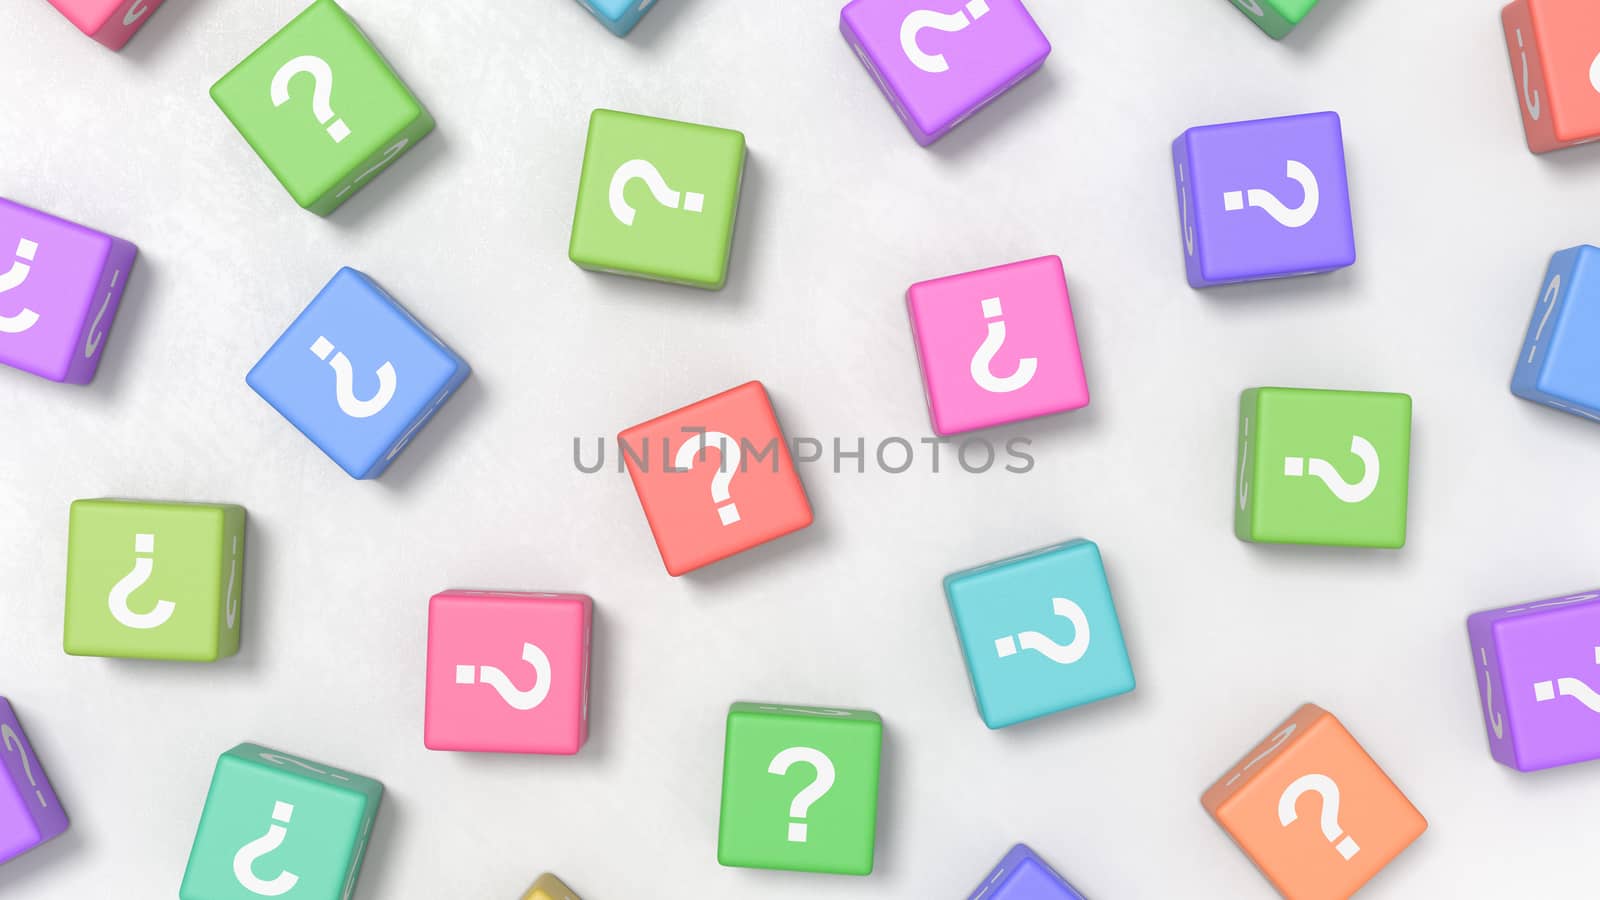 Many Question Mark on Colofrul Cubes on a Light Gray Plastered Background 3D Illustration